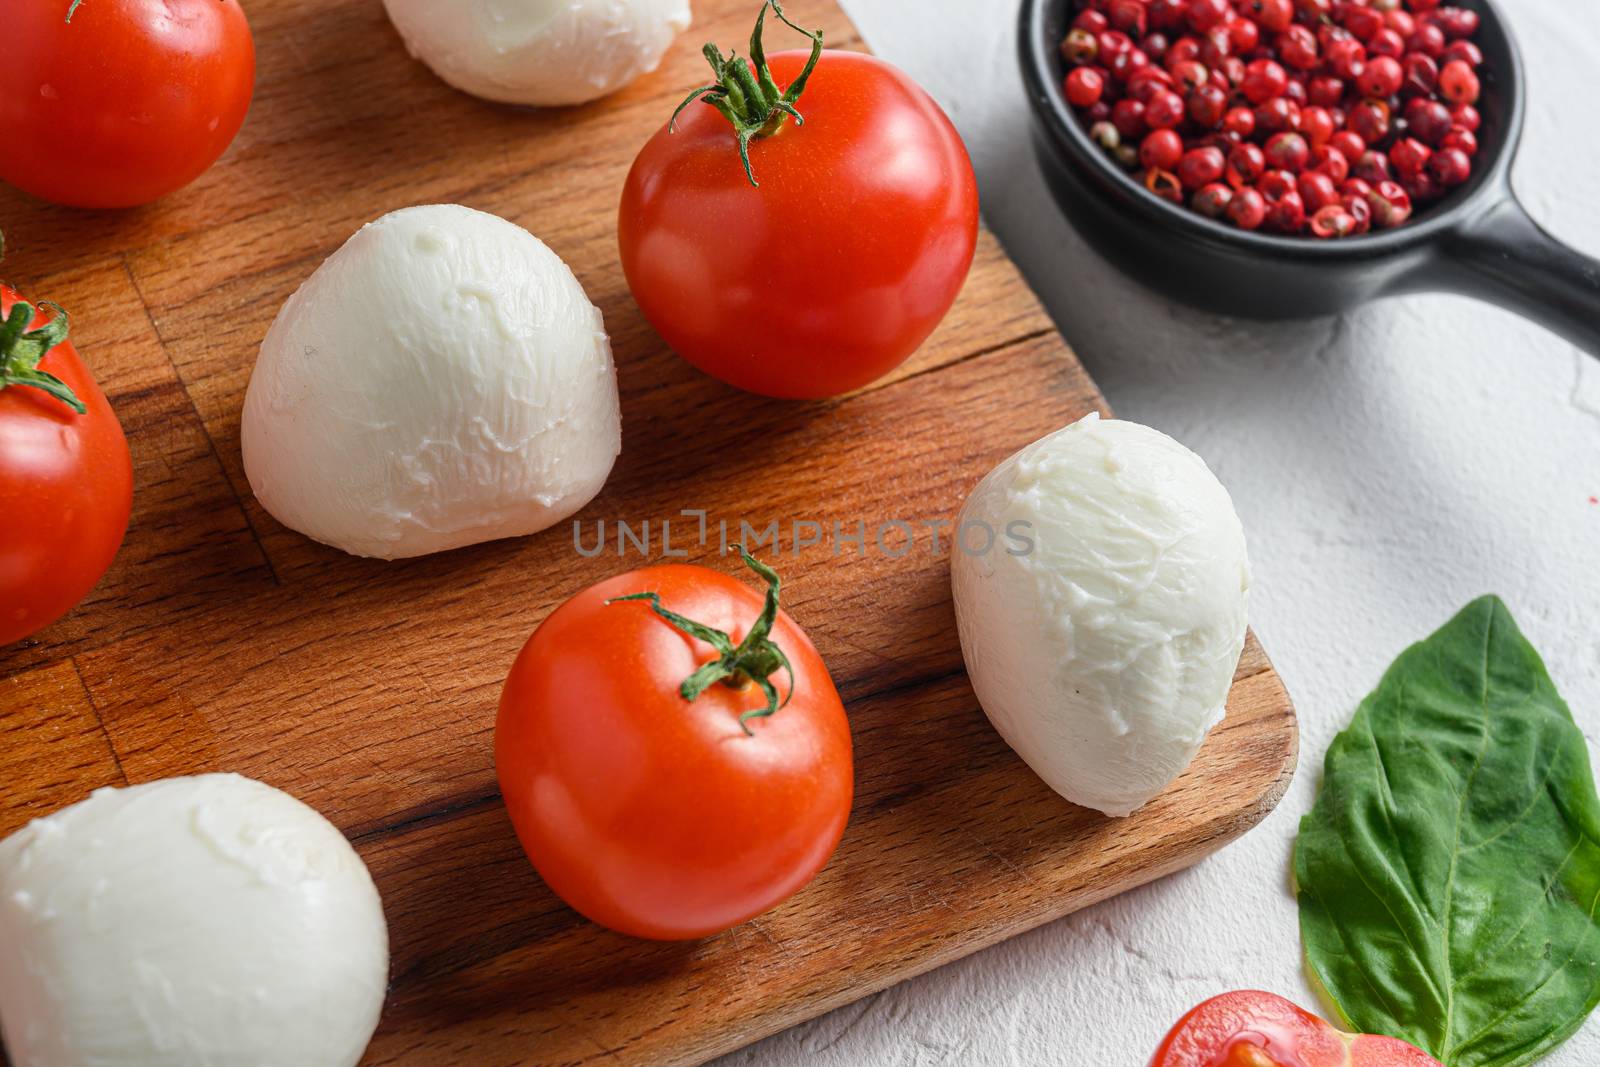 Mini balls of mozzarella cheese, on chop wood board ingredients for salad Caprese. over white background. close up selective focus.